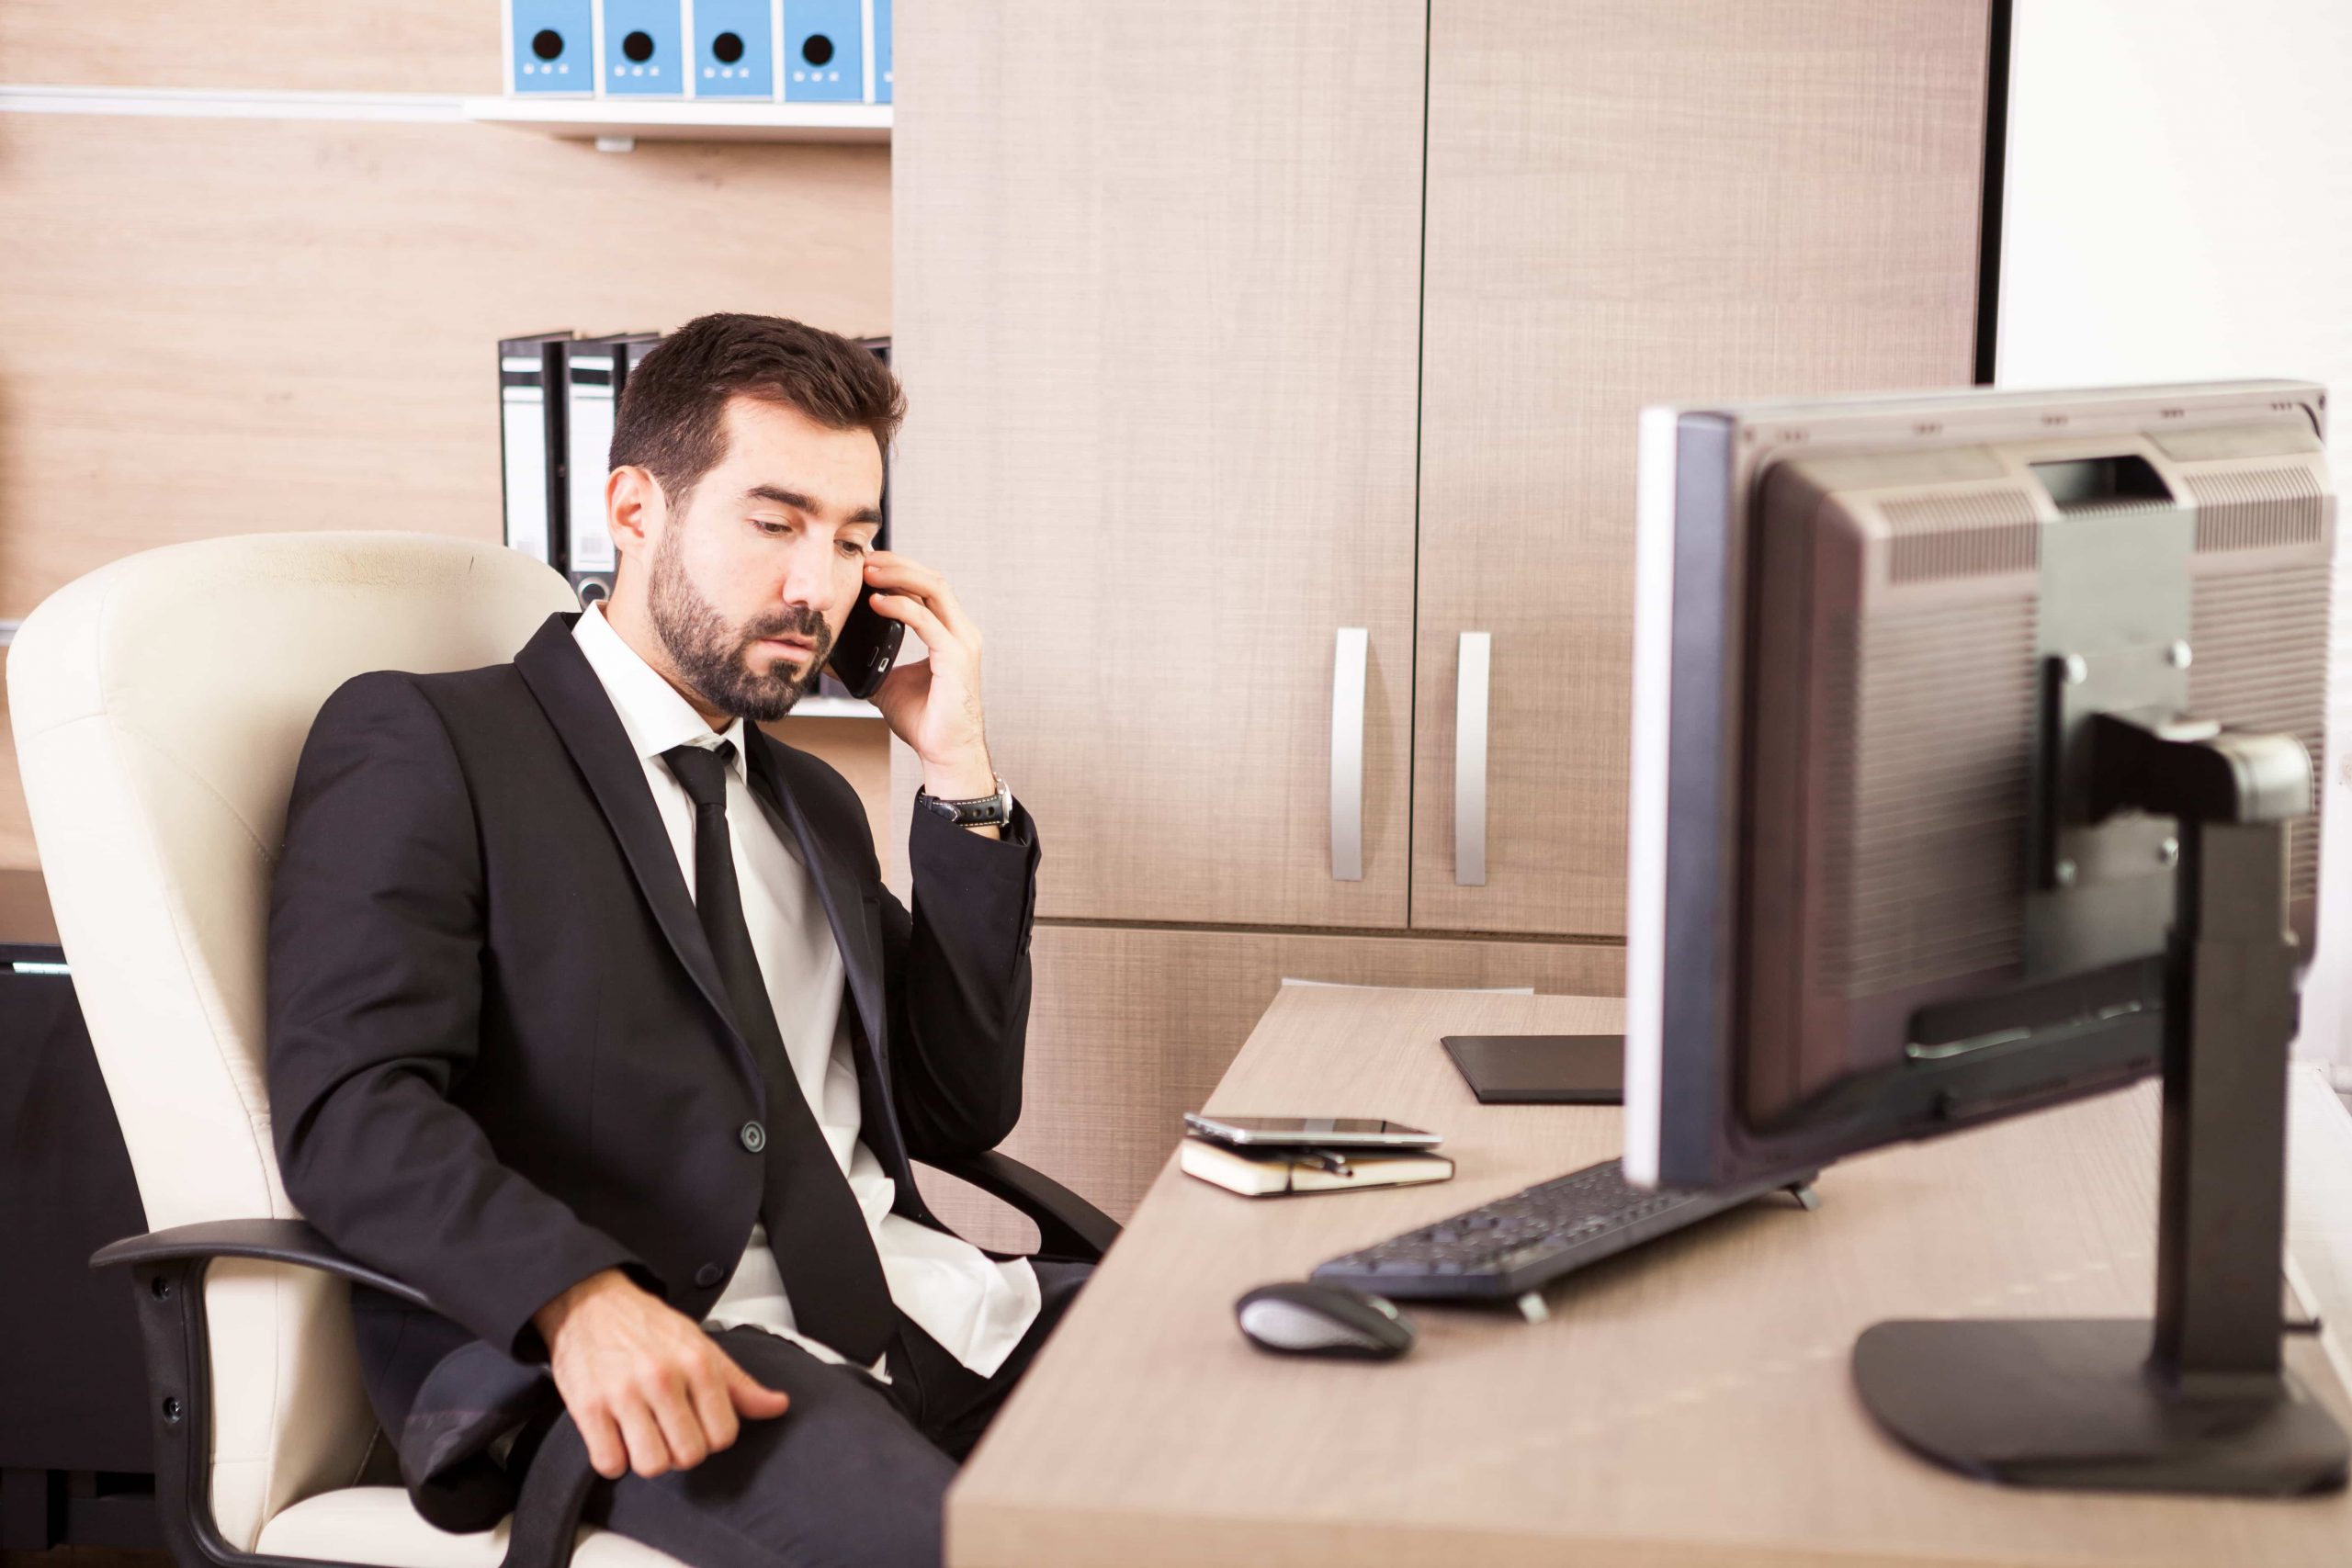 A businessman on a business call with a business coach or a business co-pilot